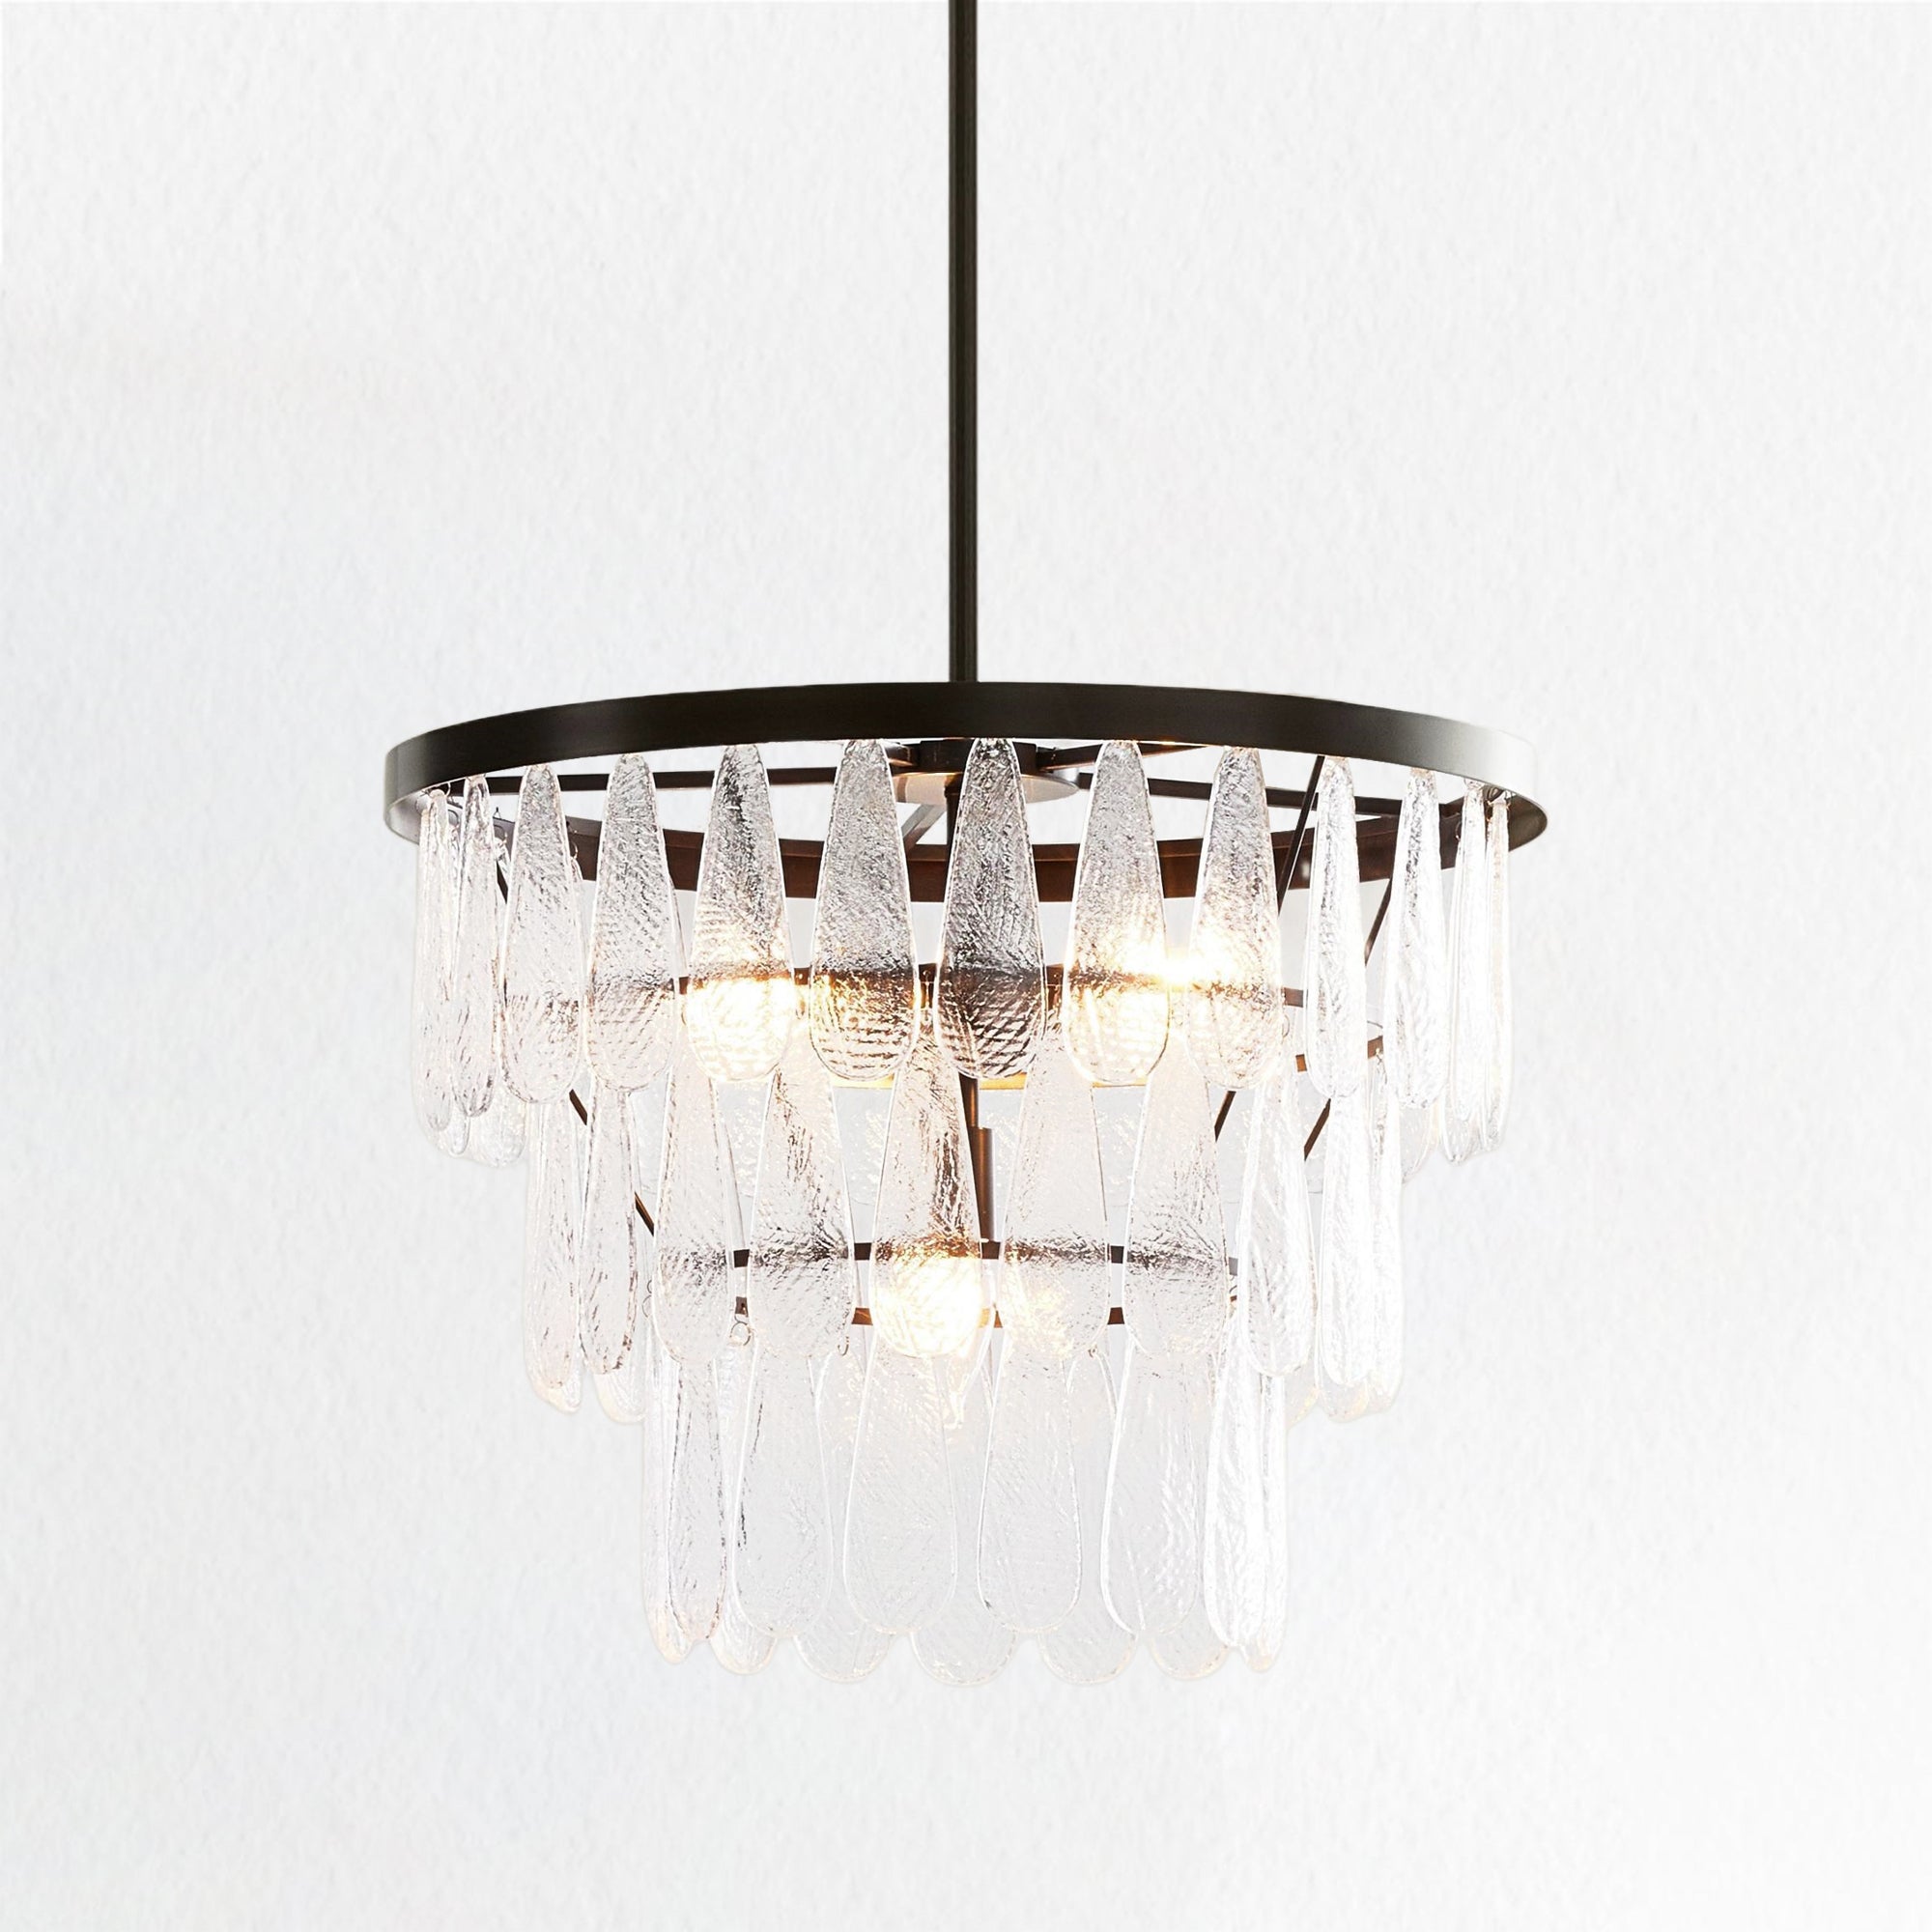 Mable Textured Glass Round Chandelier